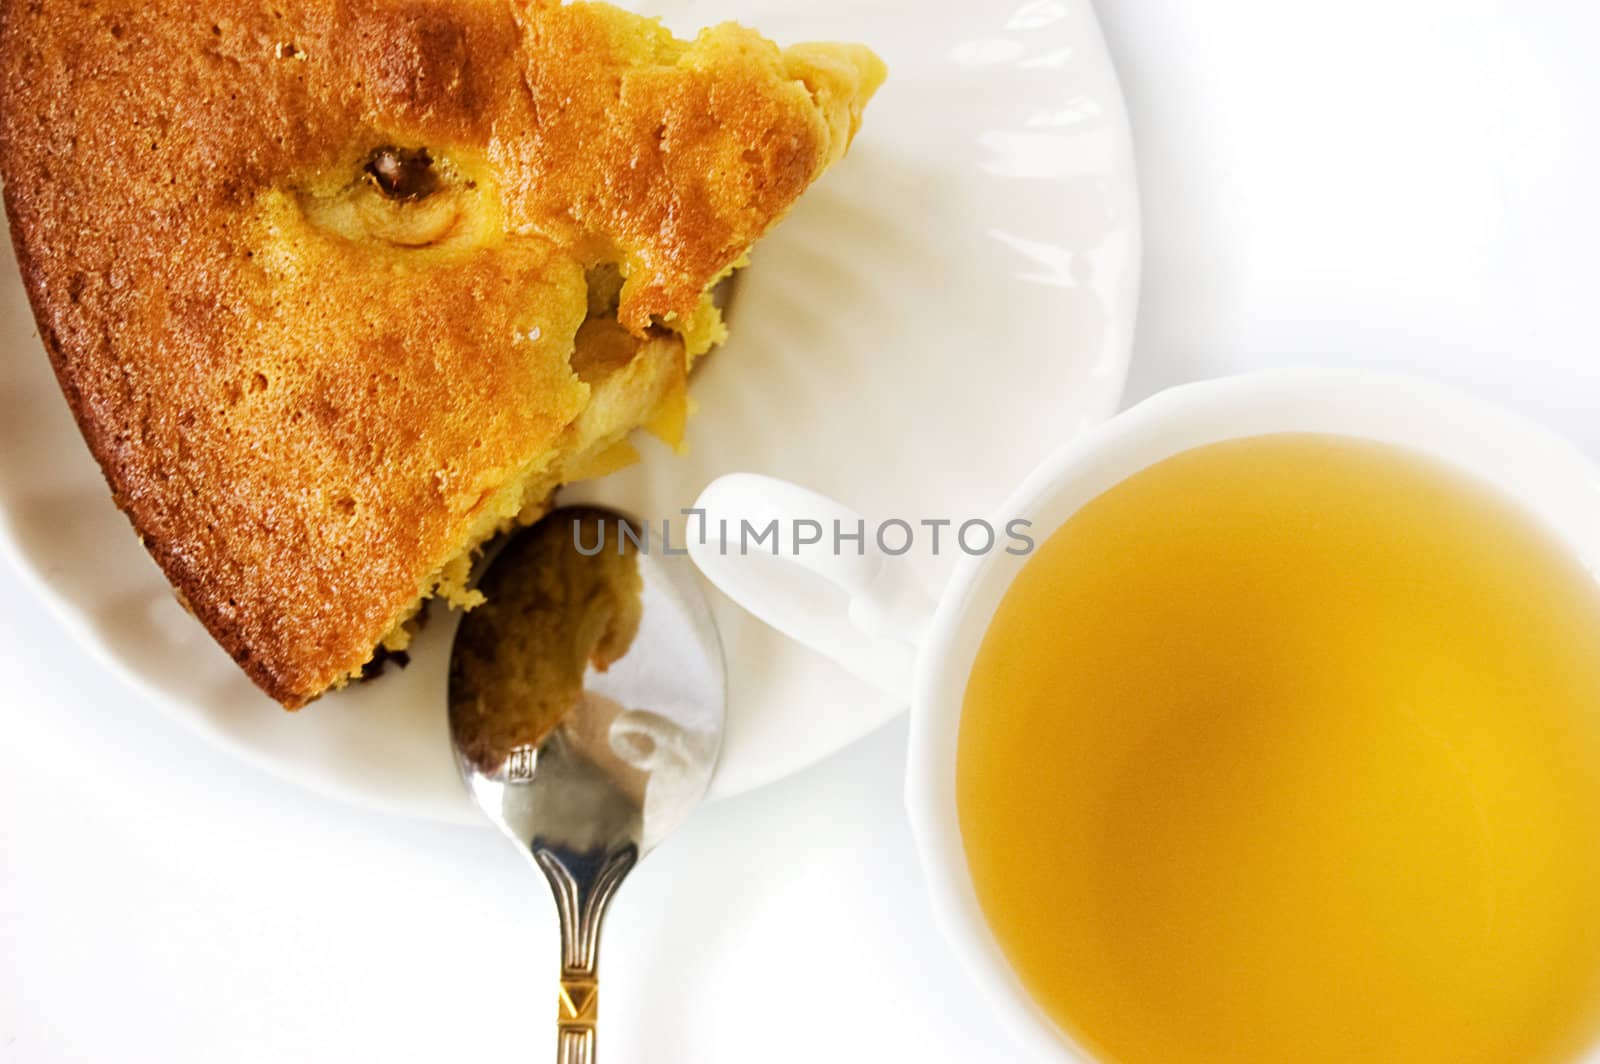 Apple pie and green tea by Angel_a